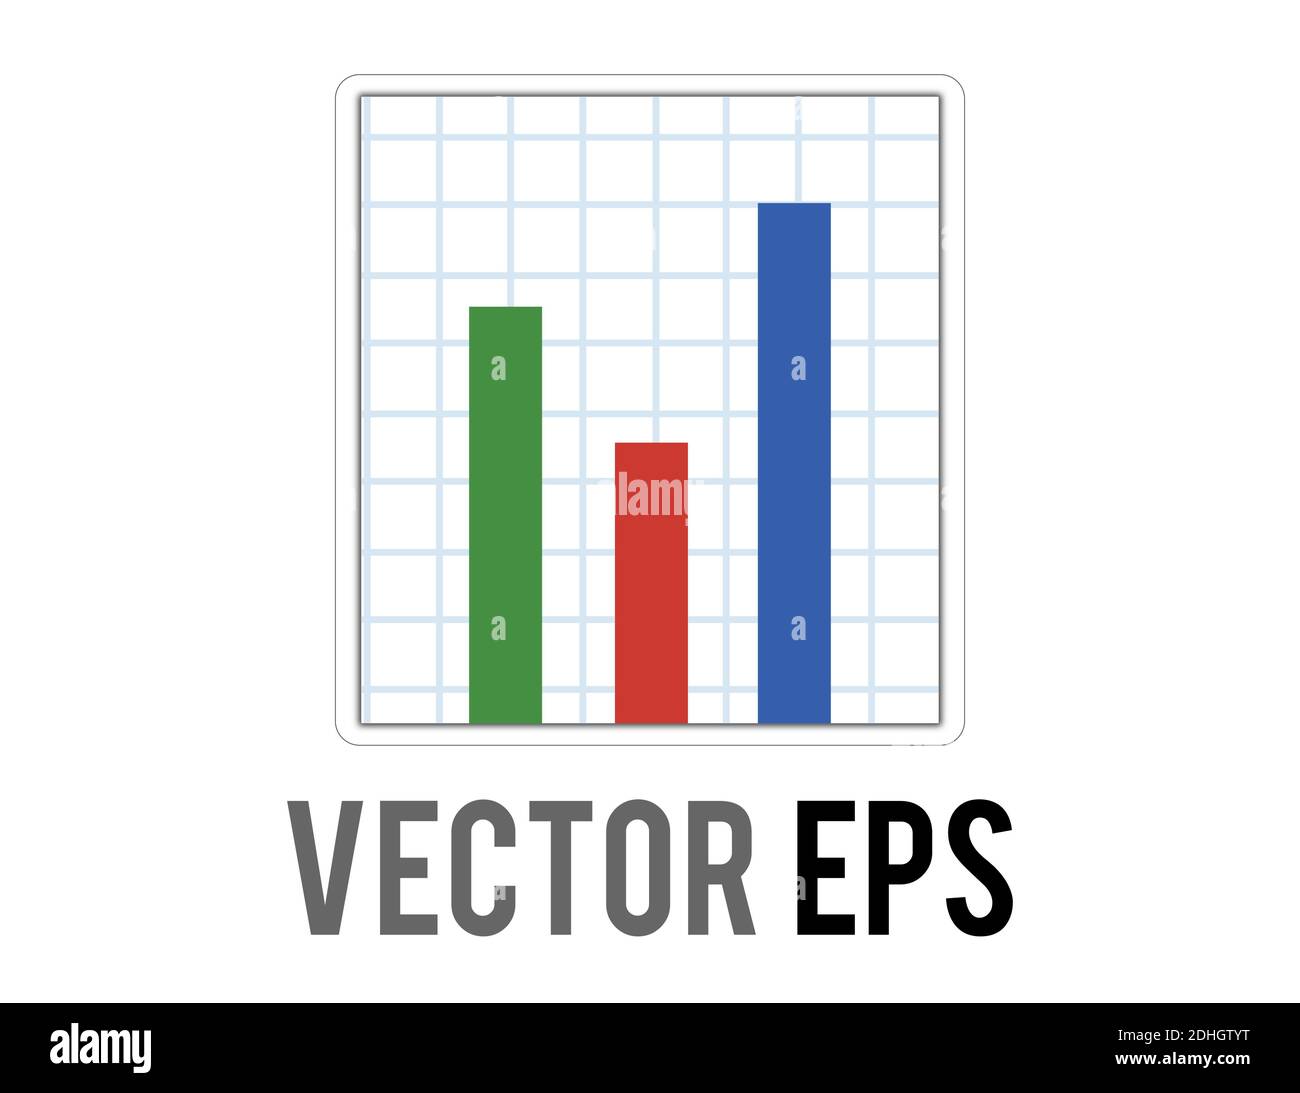 The Vector business presentation summary finance report bar chart icon showing three different colored vertical rectangles Stock Vector